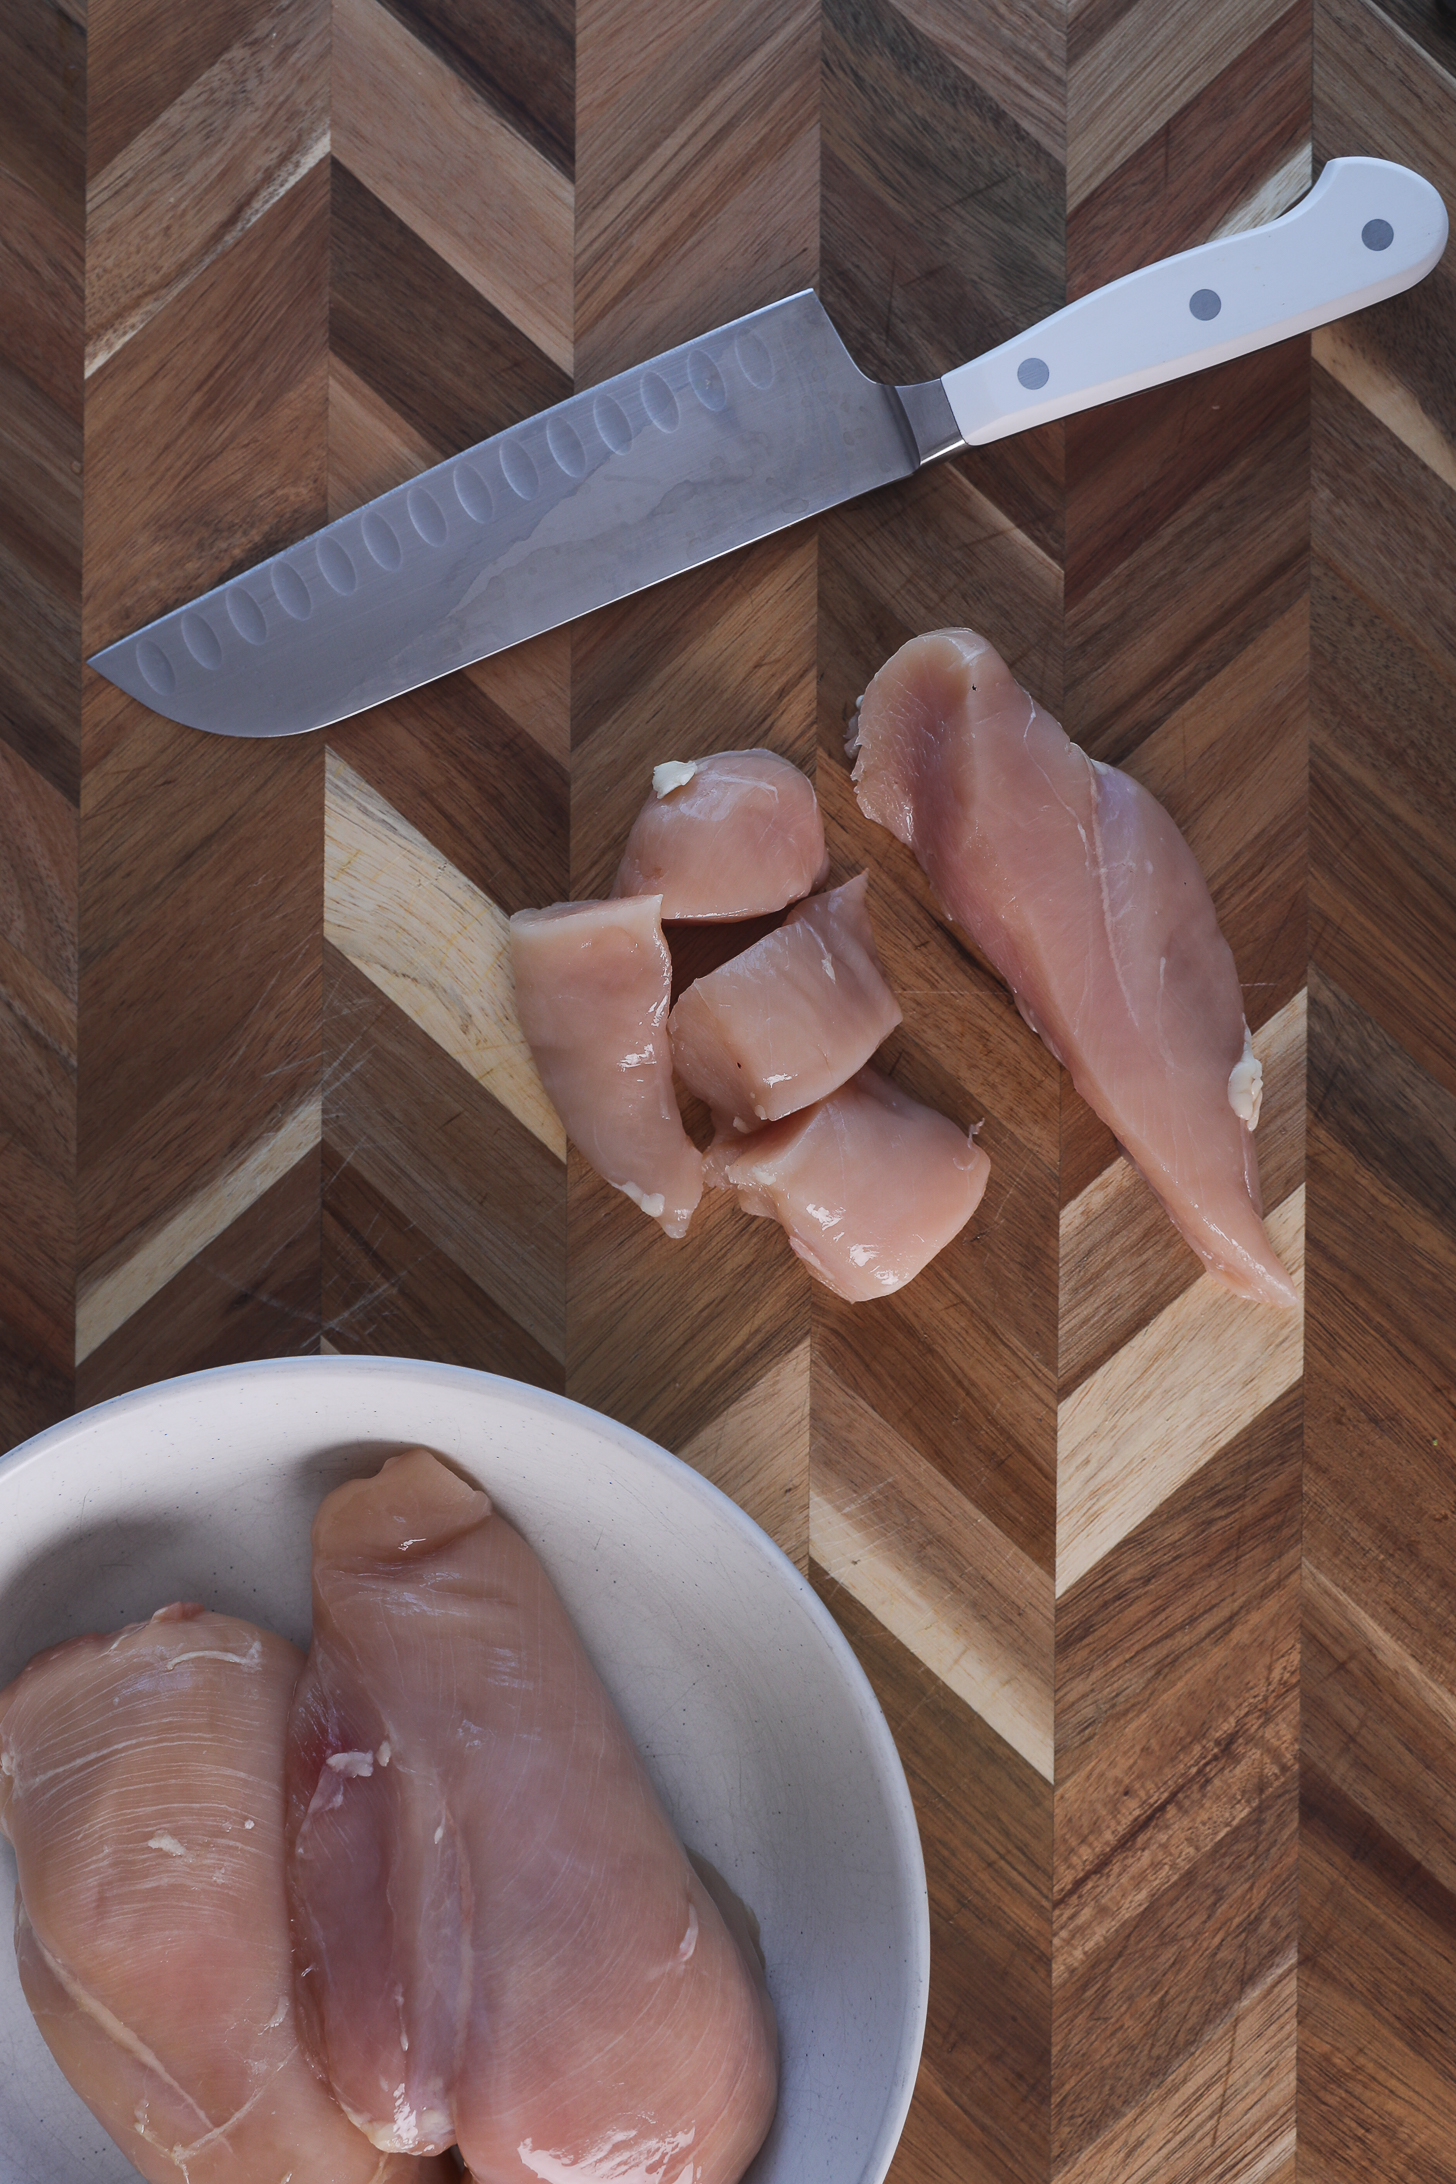 A chicken breast fillet half sliced into chunks on a wooden board with a nearby knife and a bowl of additional chicken breast fillets.